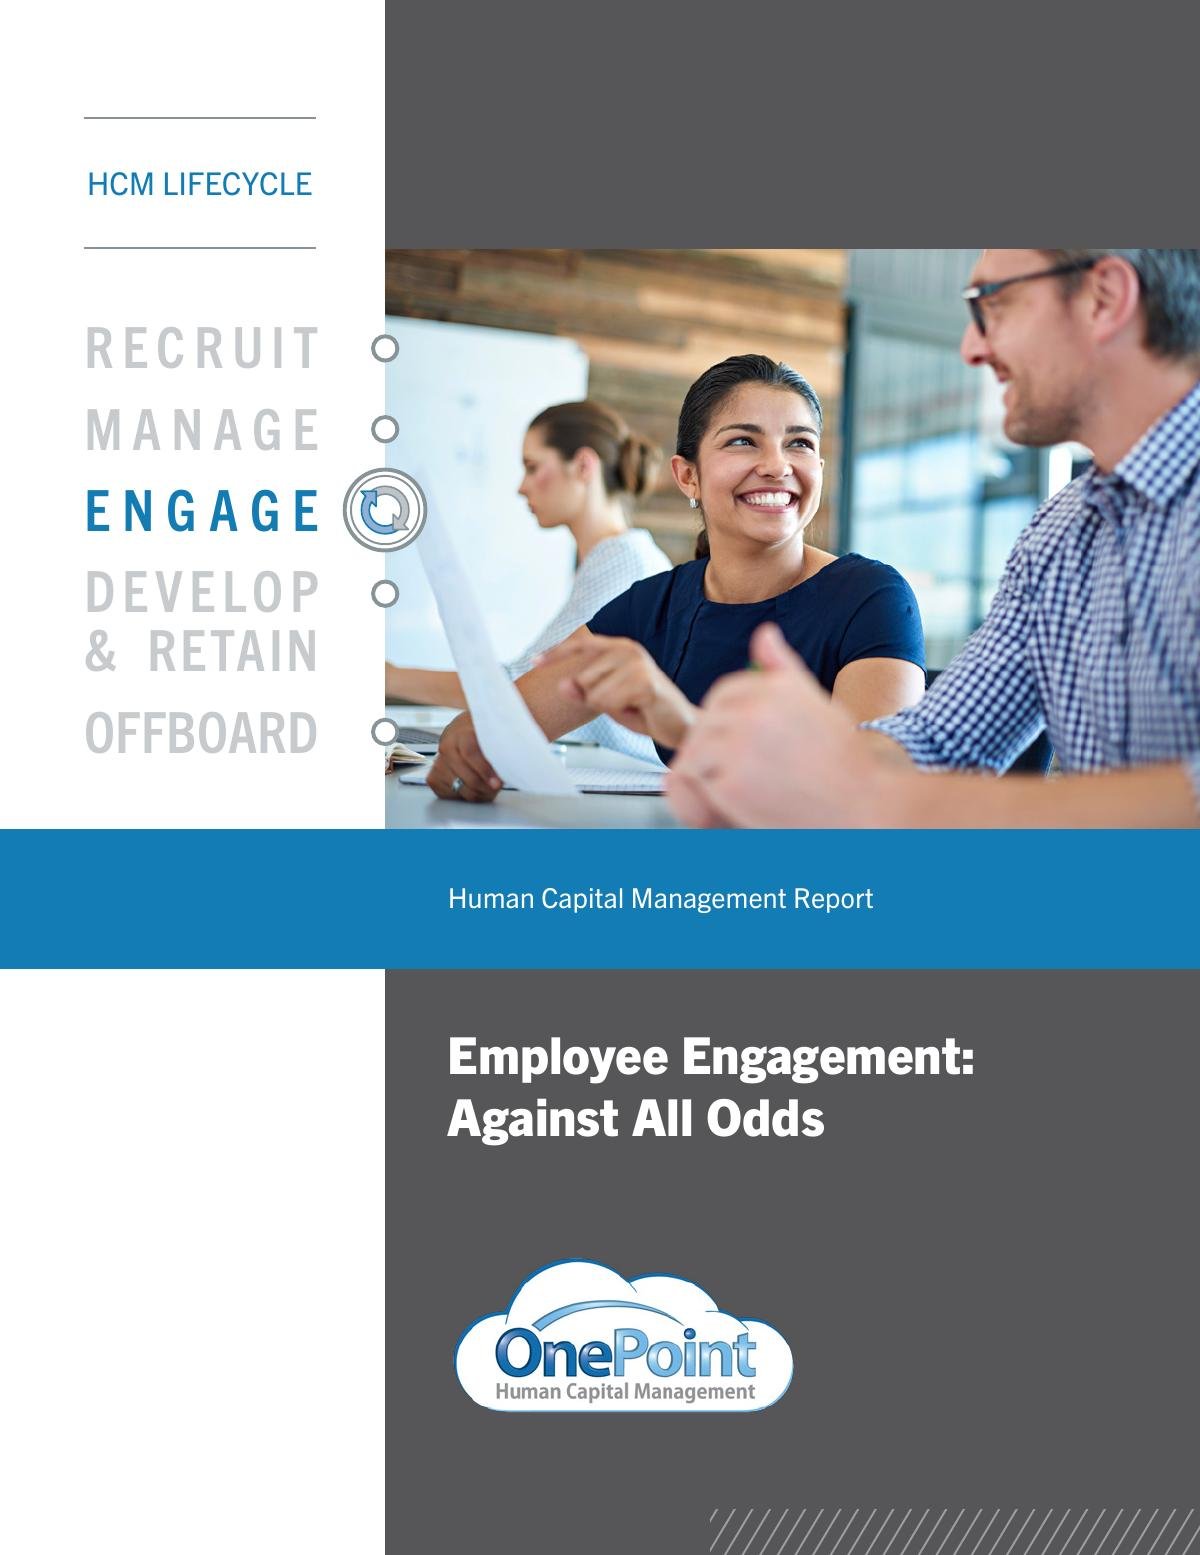 Report: Employee Engagement Against All Odds